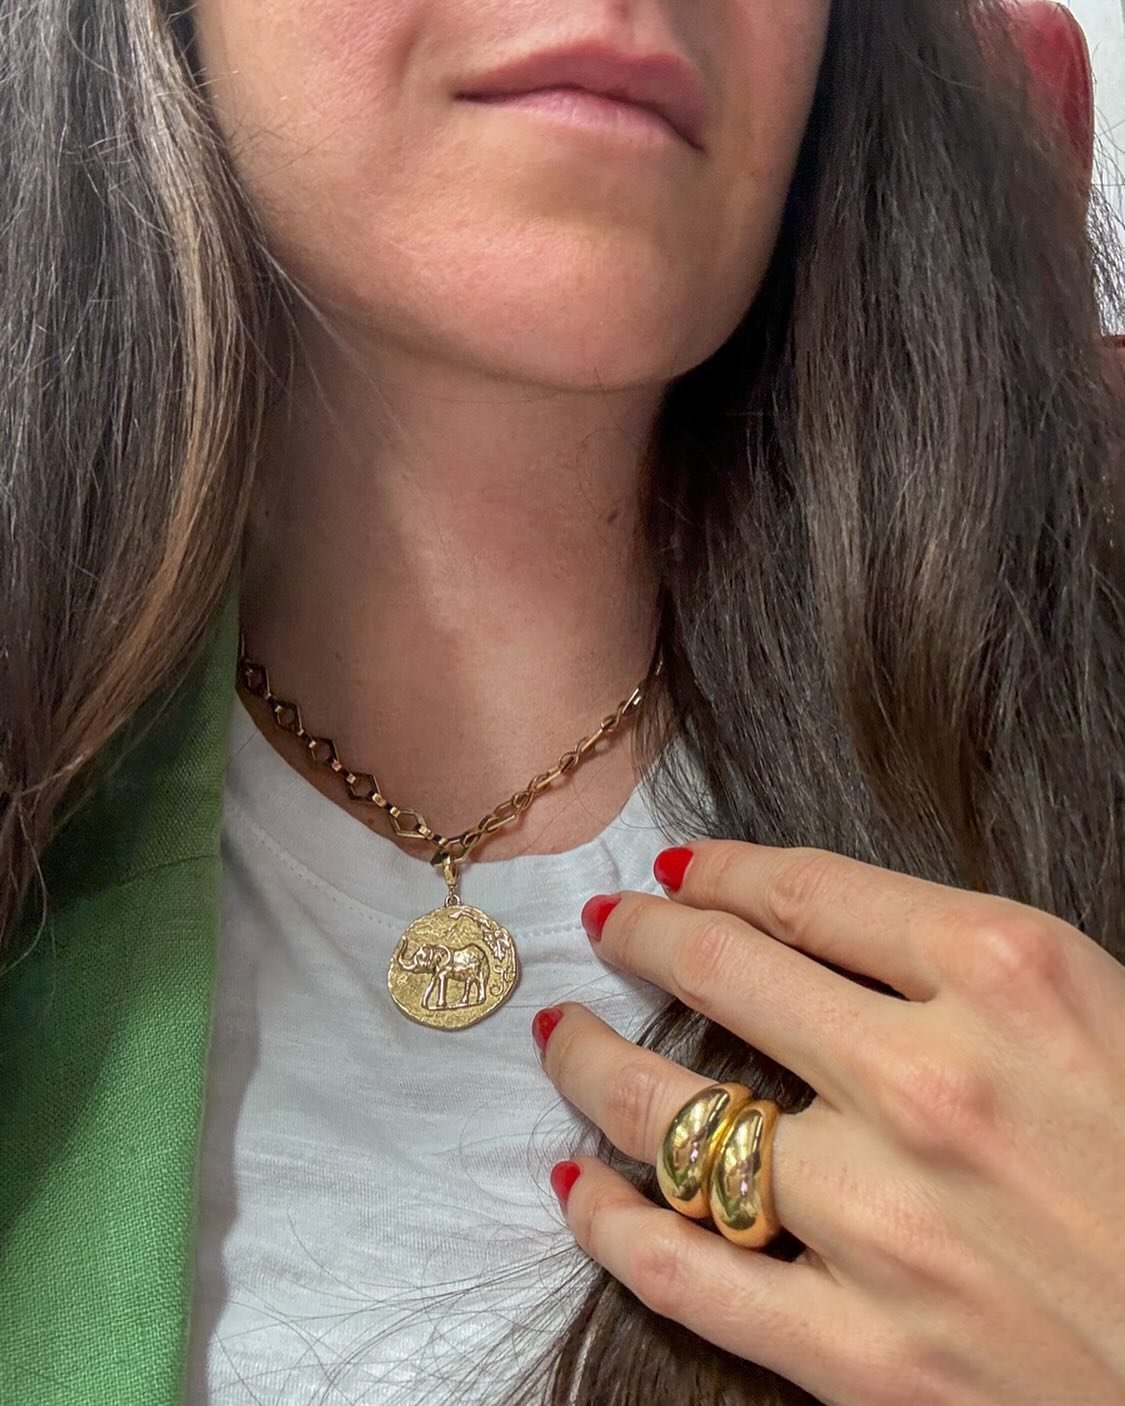 ✨YELLOW GOLD ON WHITE MIGHT BE MY NEW FAVORITE OBSESSION ✨

Monday Jewelry Look: @azlee_ Large Elefante coin on the heavy lozenge link chain. And of course my @mirtadegisbert Kupula rings. Details and pricing below. All of these pieces are 18k yellow